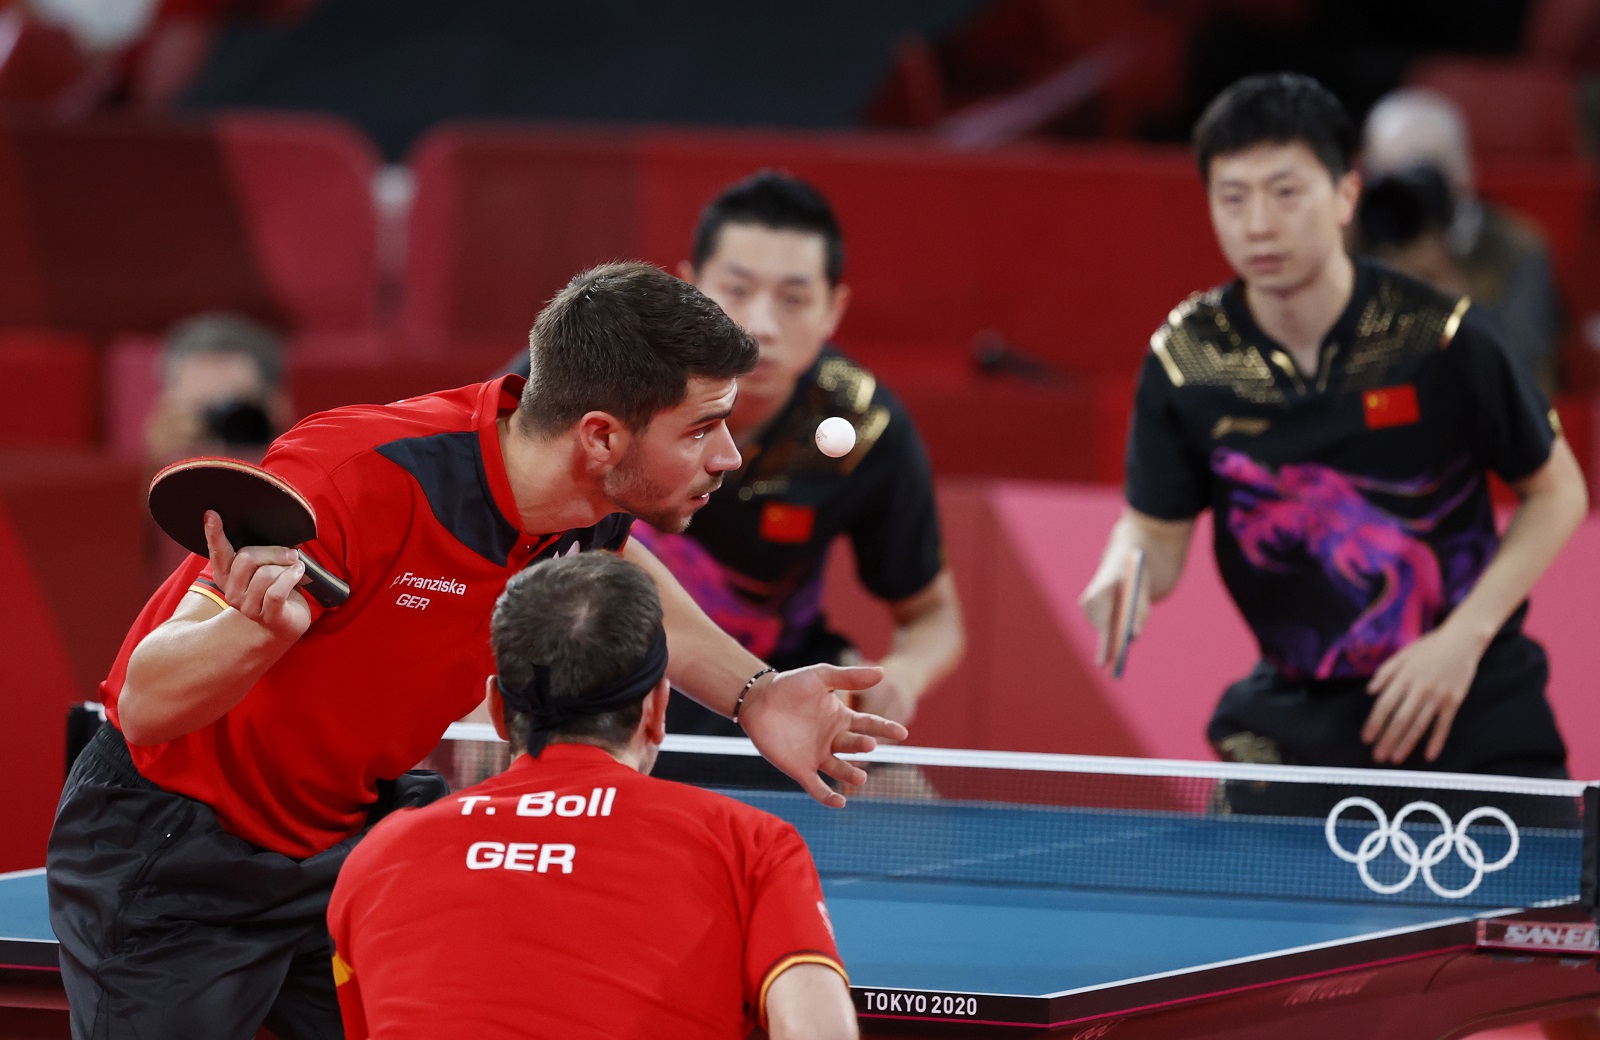 epa09400193 Timo Boll (R) und Patrick Franziska (R) of Germany in action during the Table Tennis men's team cold medal match against Ma Long and Xu Xin of China during the Tokyo 2020 Olympic Games at the Tokyo Metropolitan Gymnasium arena in Tokyo, Japan, 06 August 2021.  EPA/MAST IRHAM